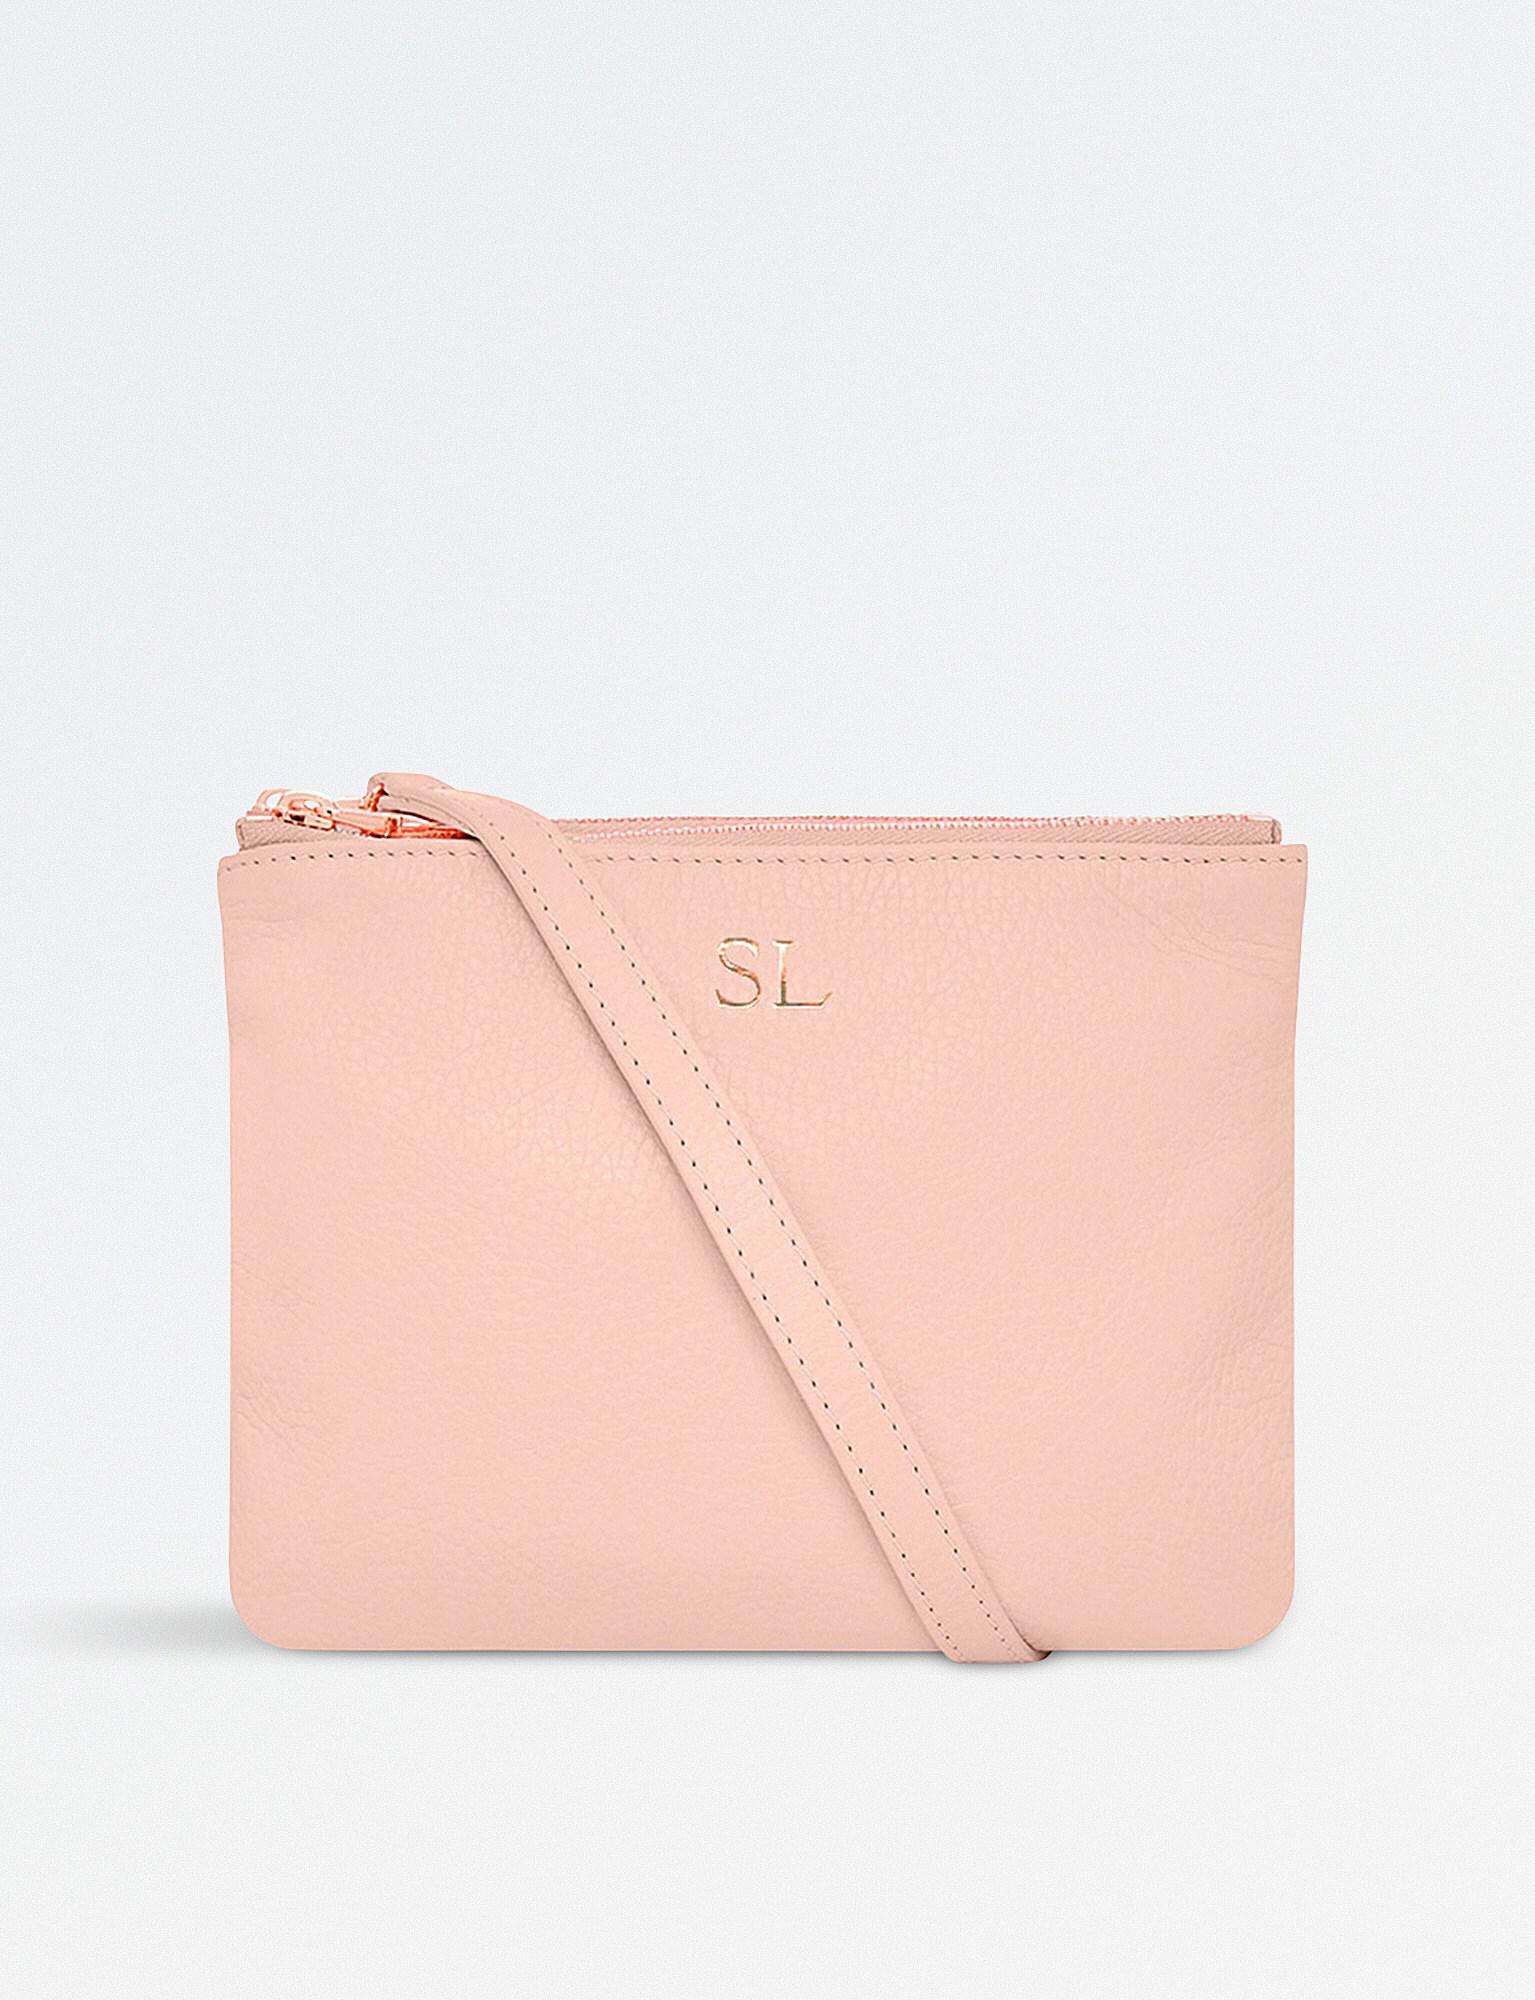 Lyst - Mon Purse Double Pouch Grainy Leather Cross-body Bag in Pink